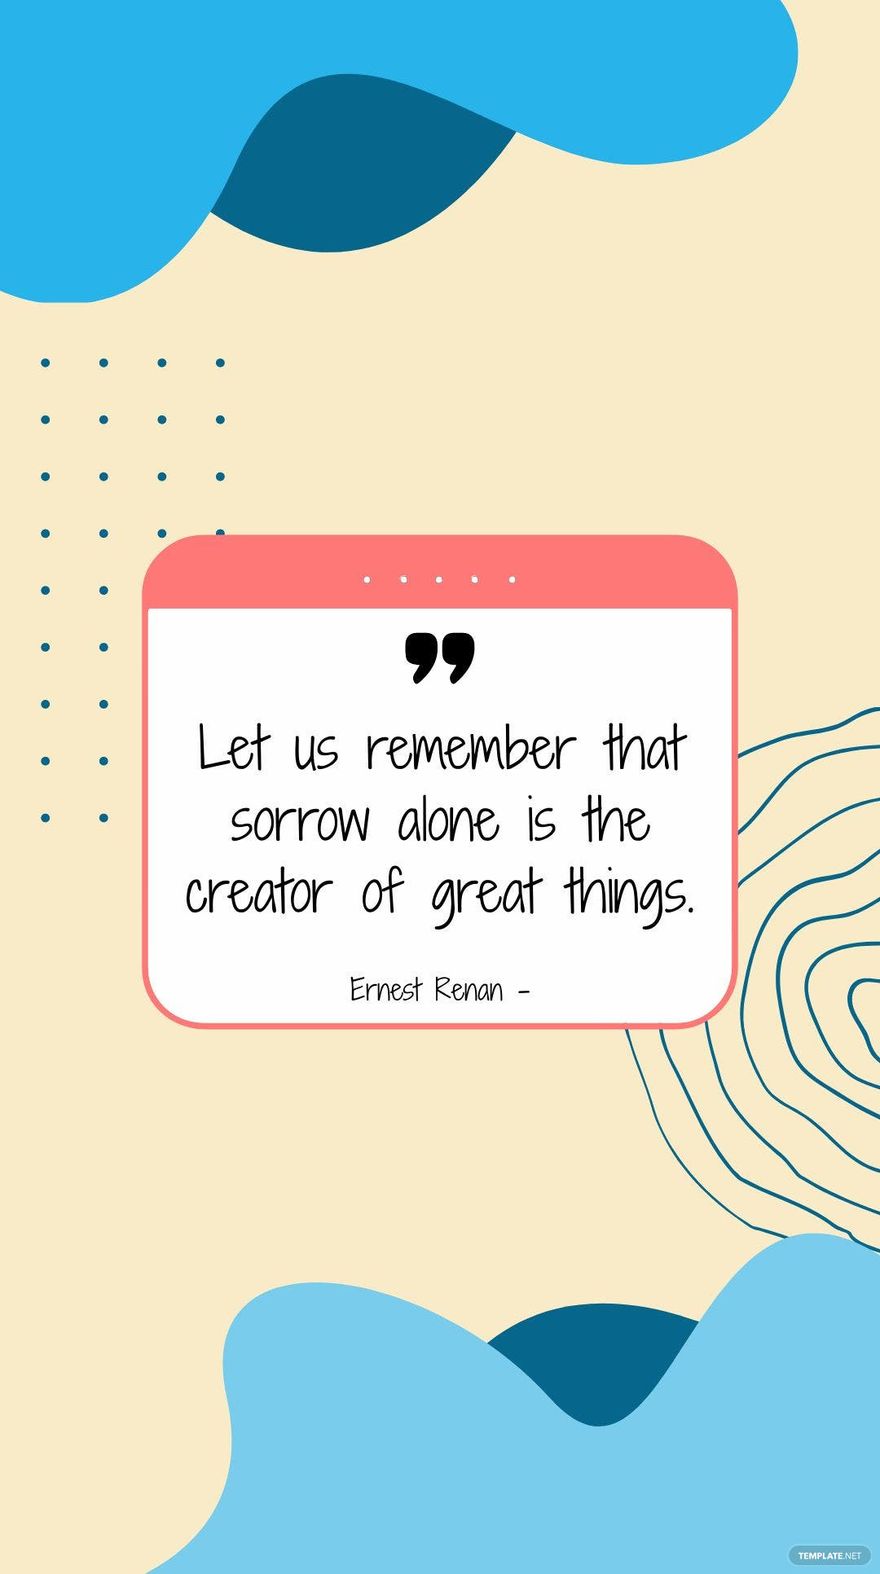 Ernest Renan - Let us remember that sorrow alone is the creator of great things.